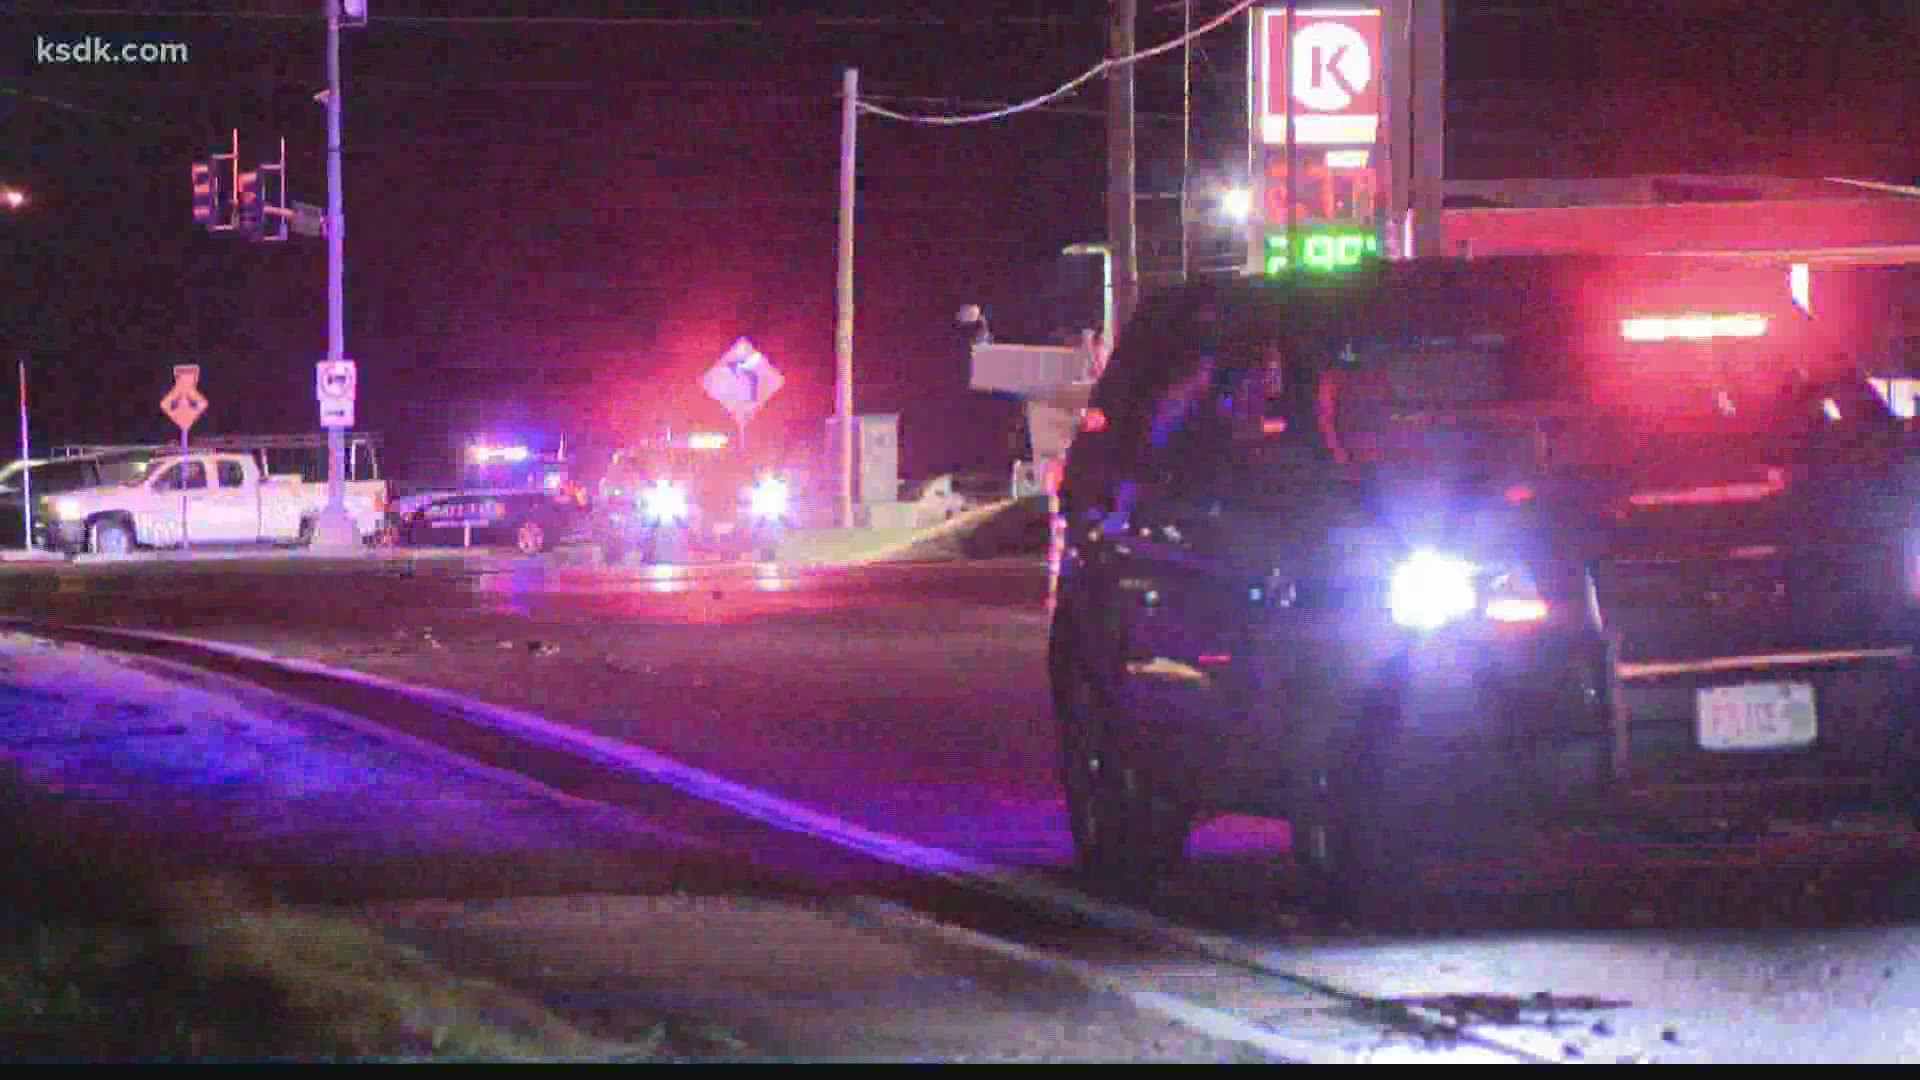 The crash happened at around 3:15 a.m. on Jeffco Boulevard near Starling Airport Road